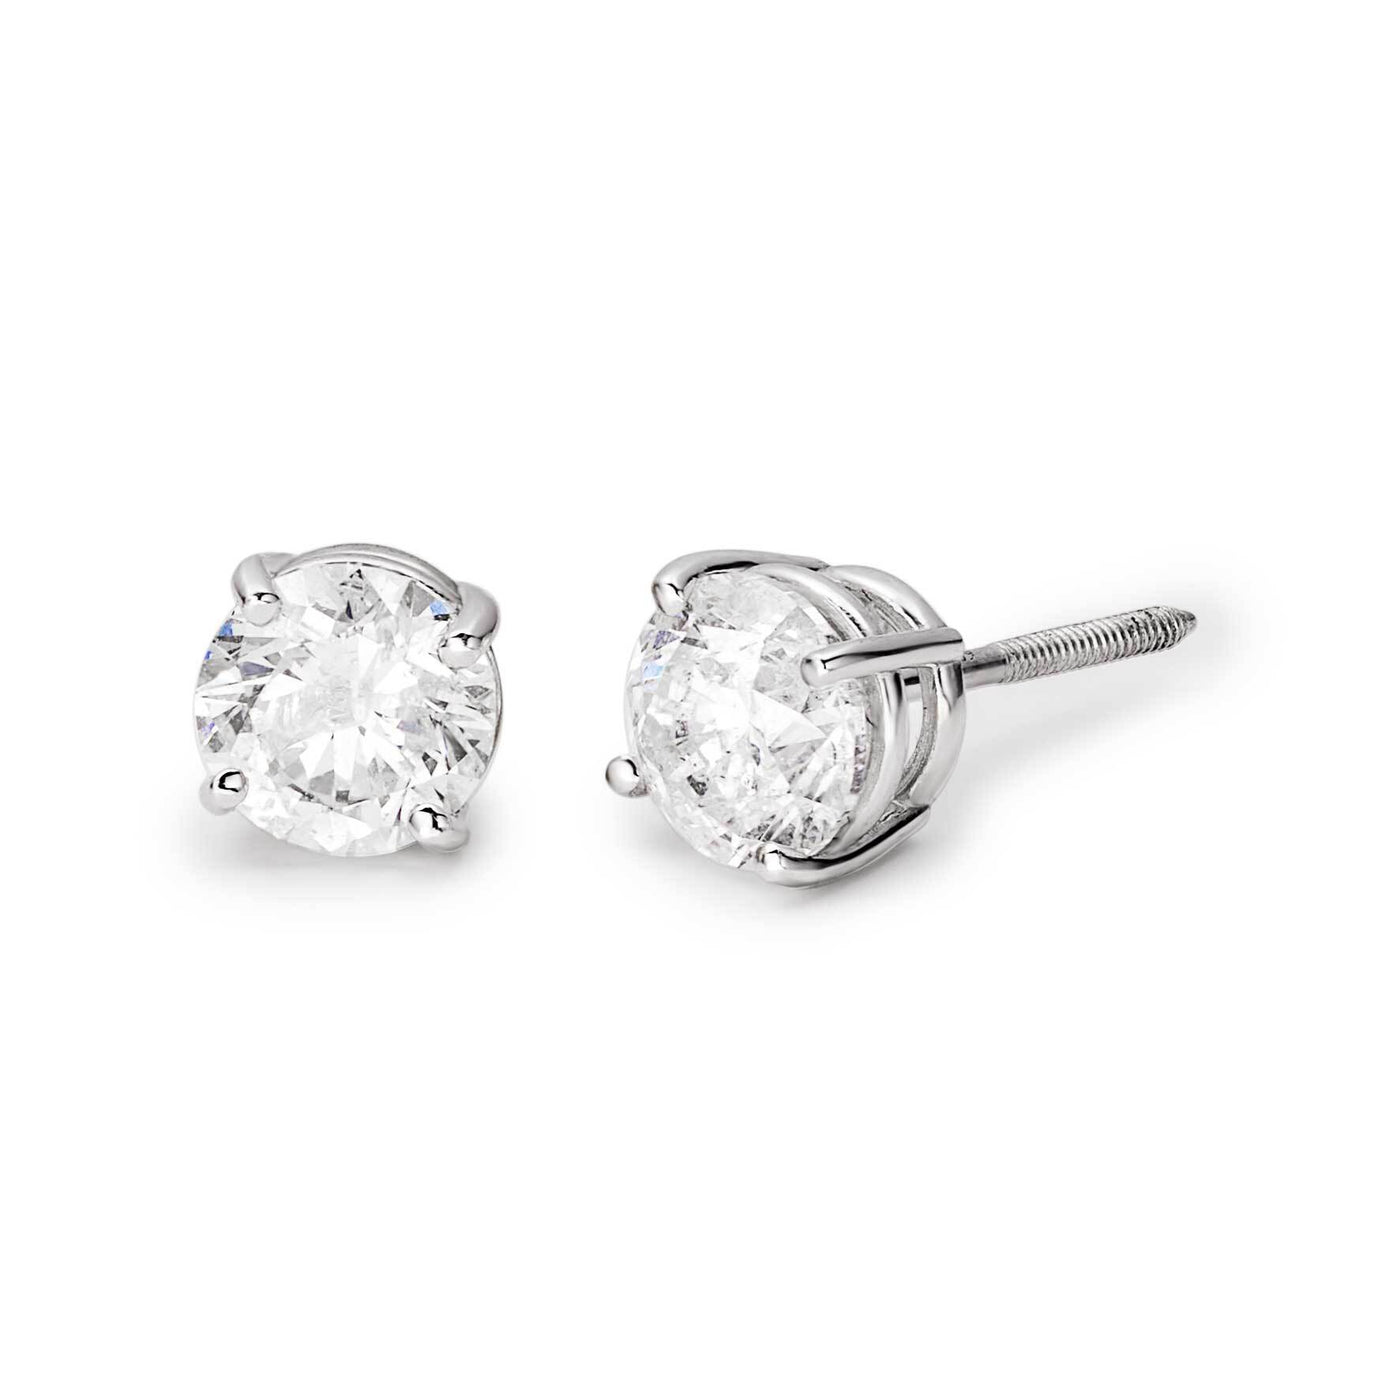 Four-Prong Round Cut Solitaire Diamond Stud Earrings 14K White Gold